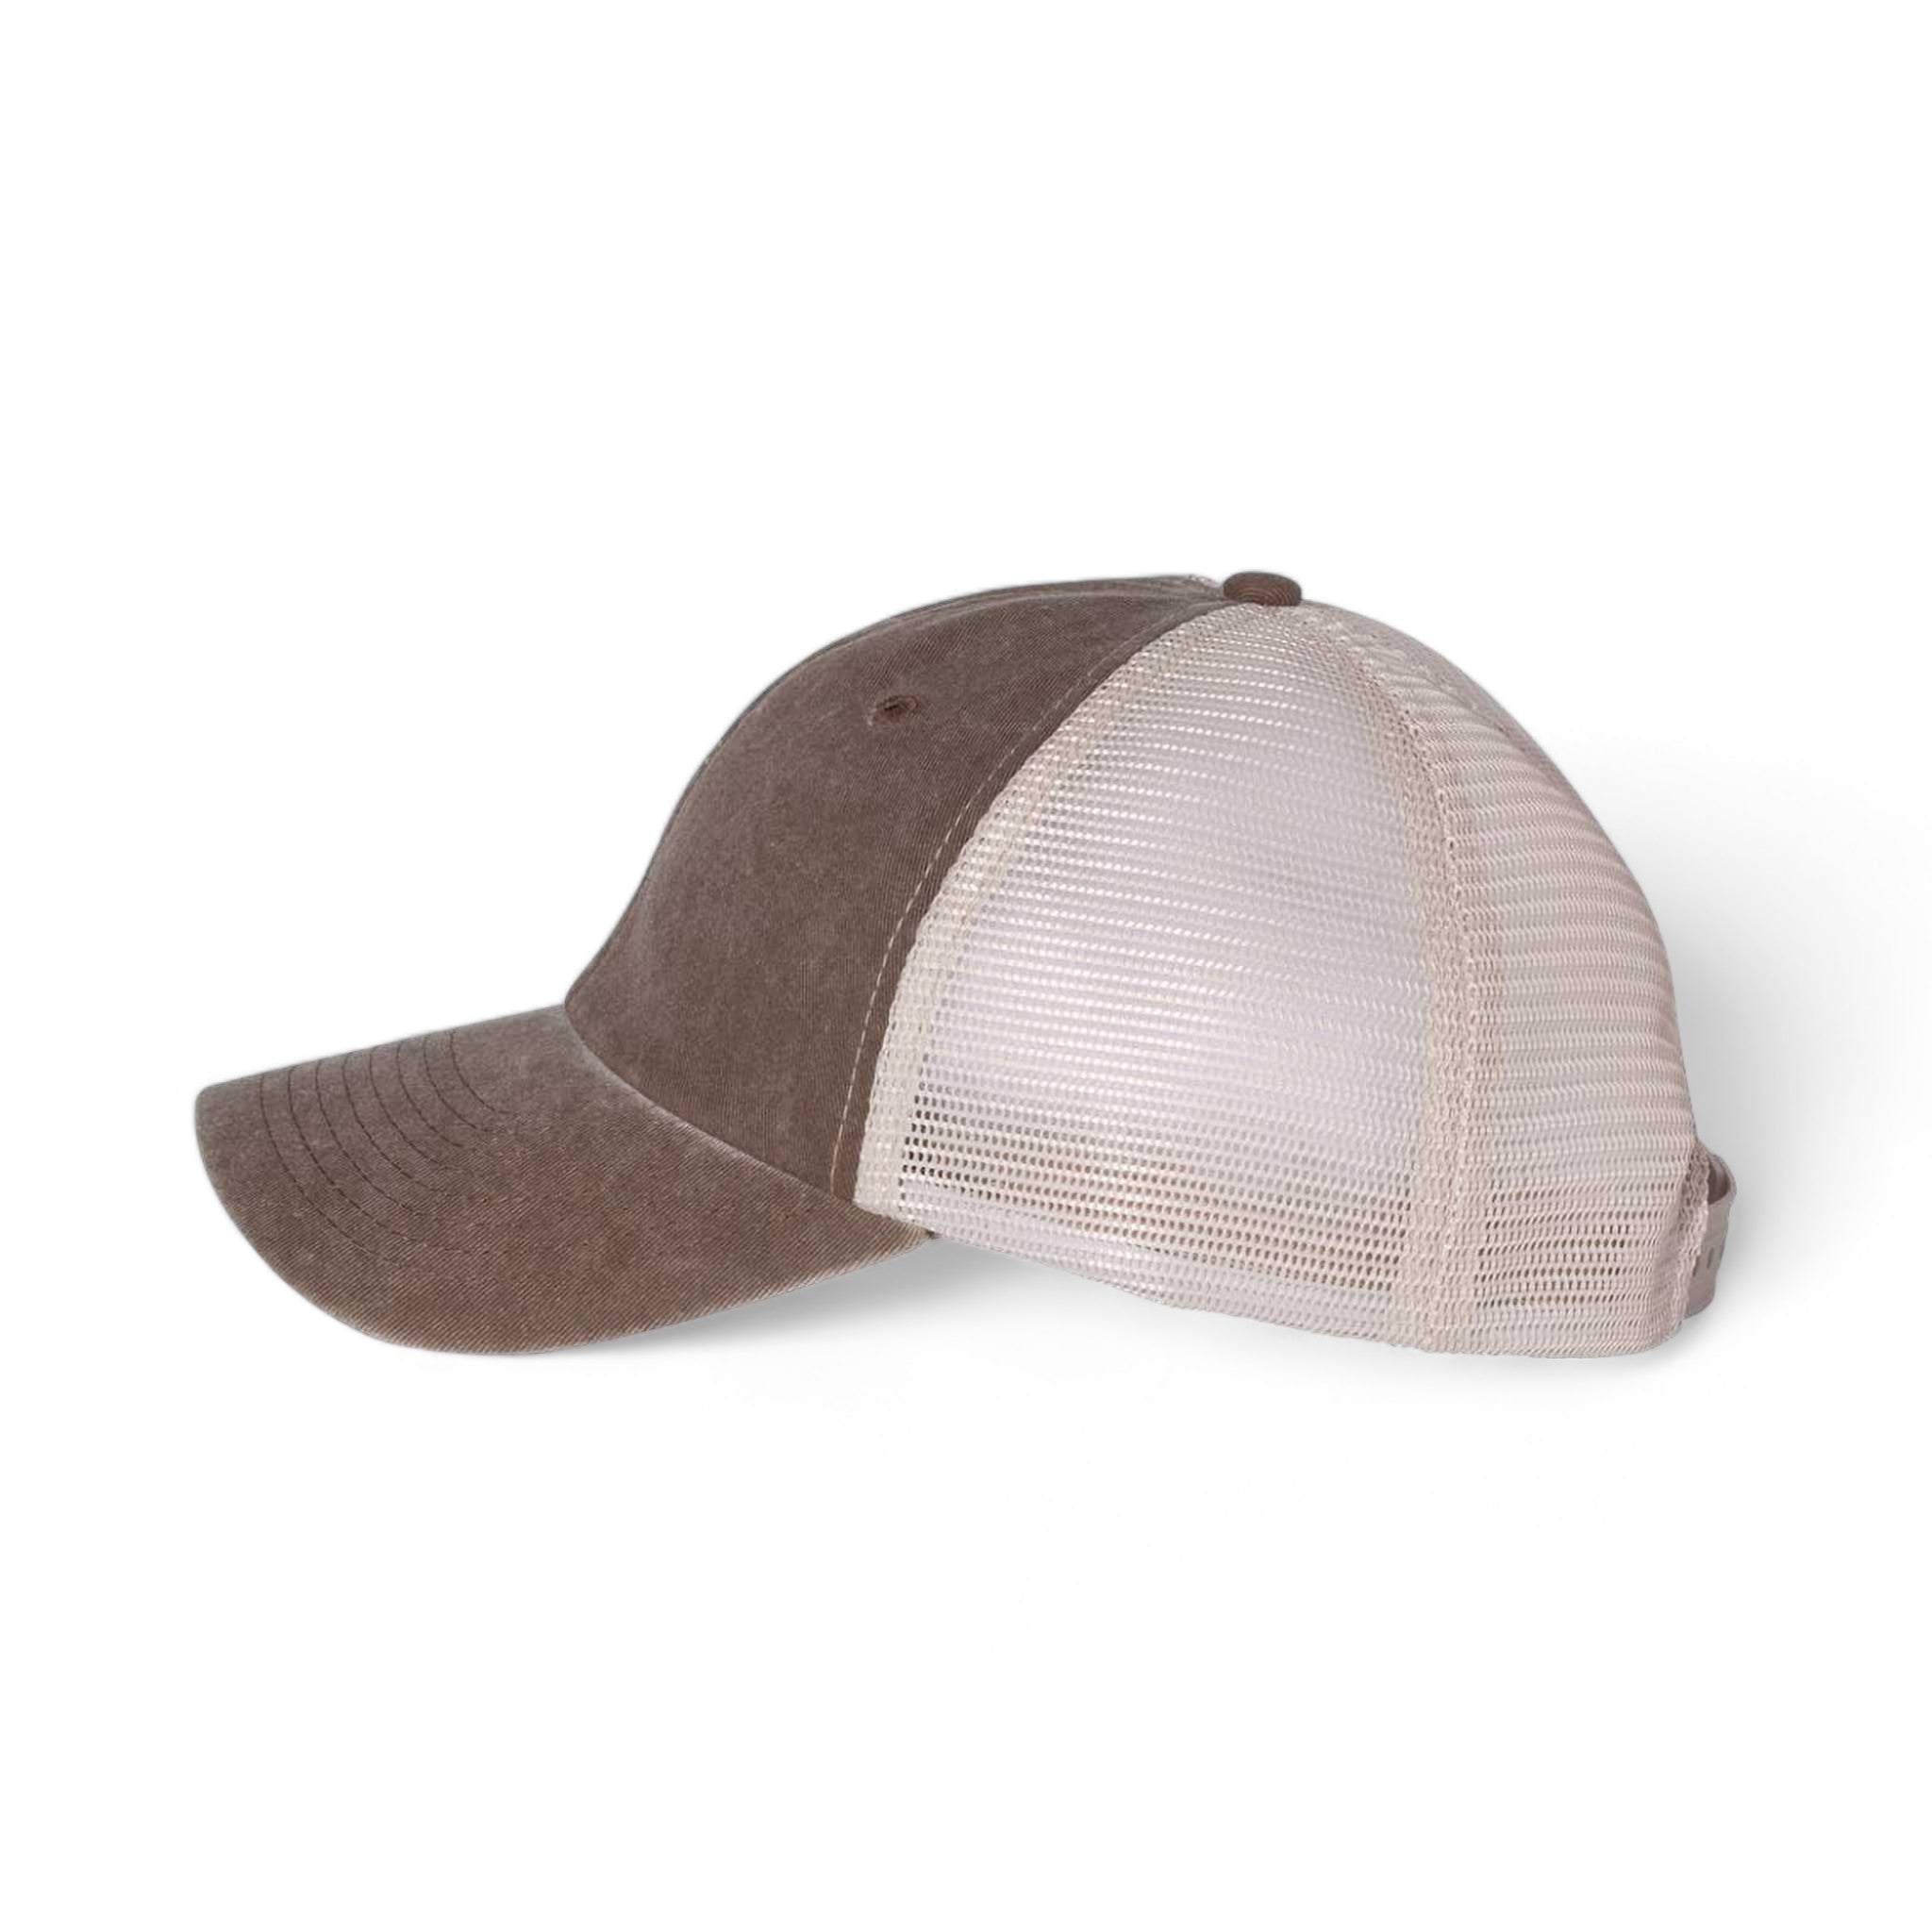 Side view of Sportsman SP510 custom hat in brown and stone